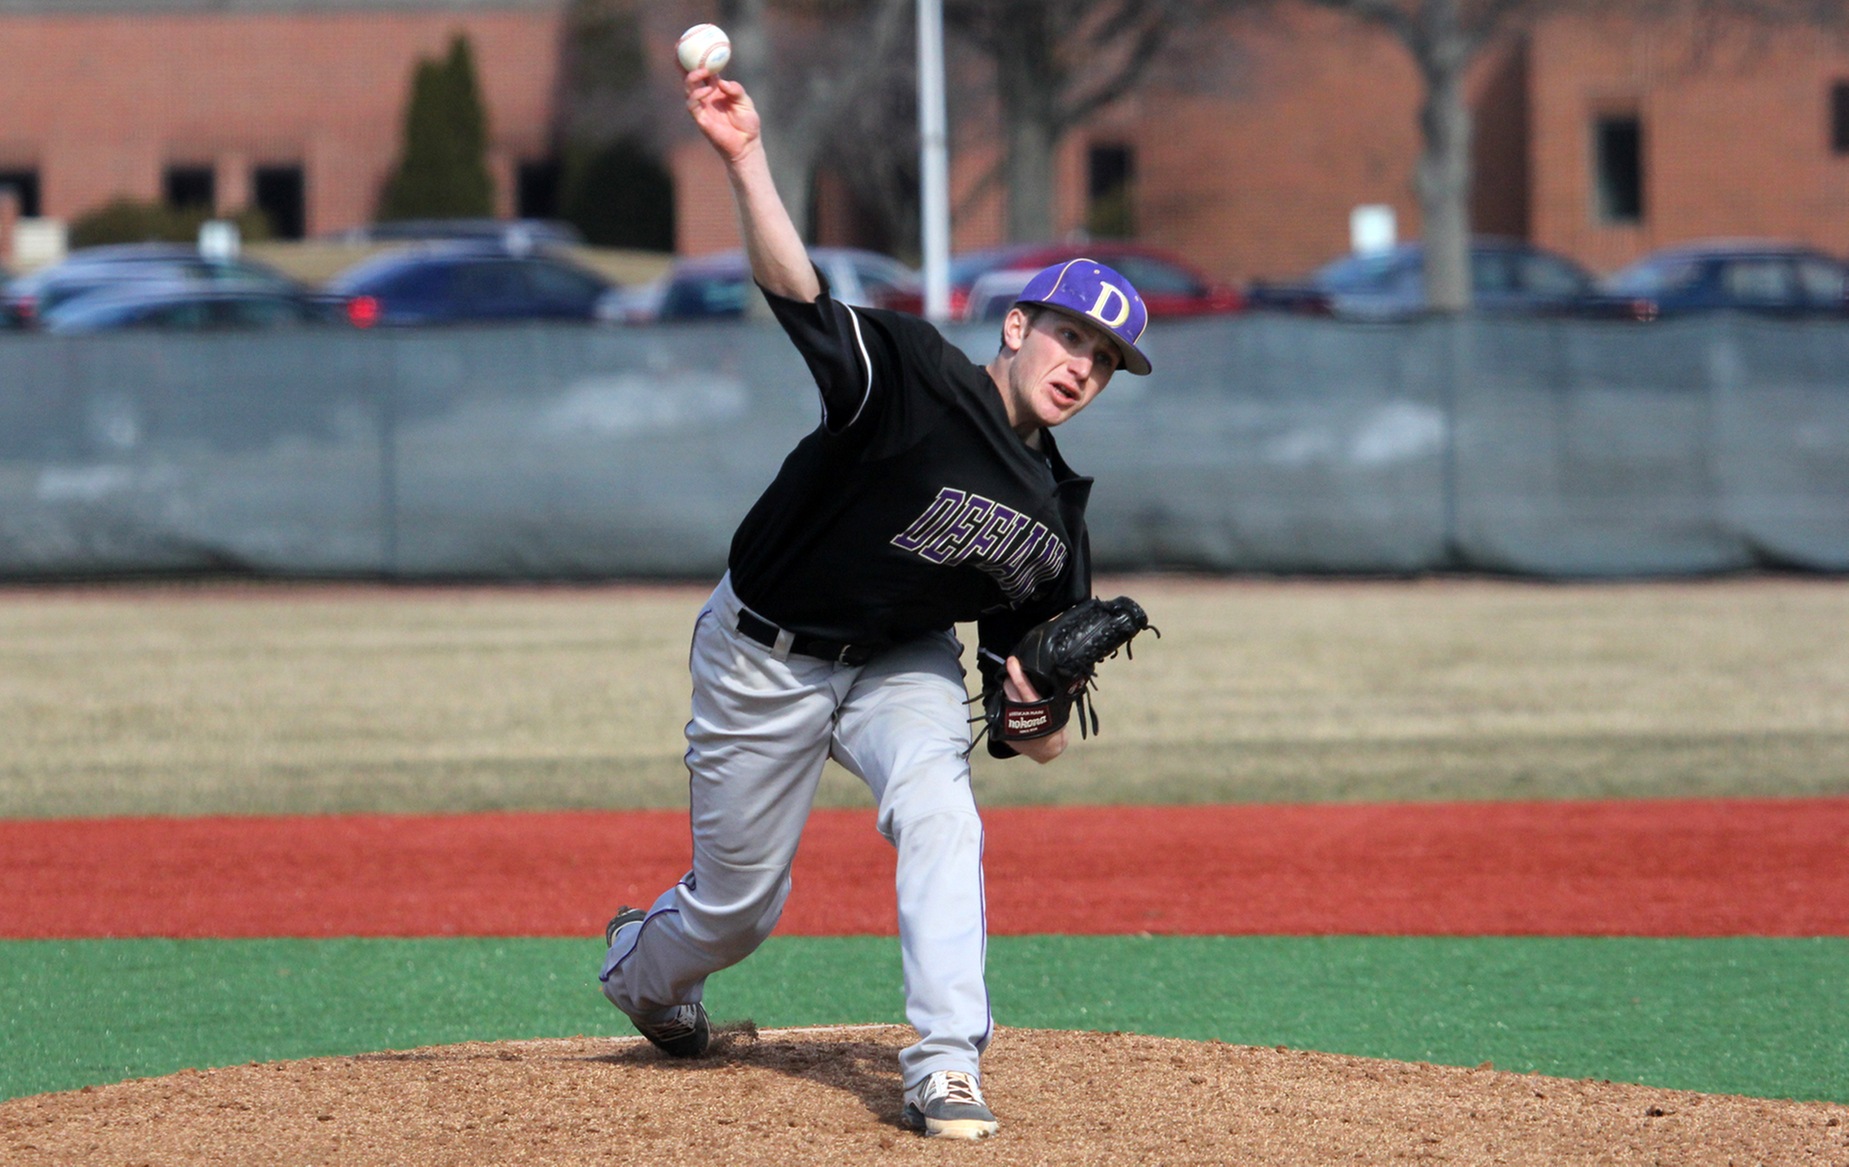 Baseball splits with Earlham in doubleheader Saturday